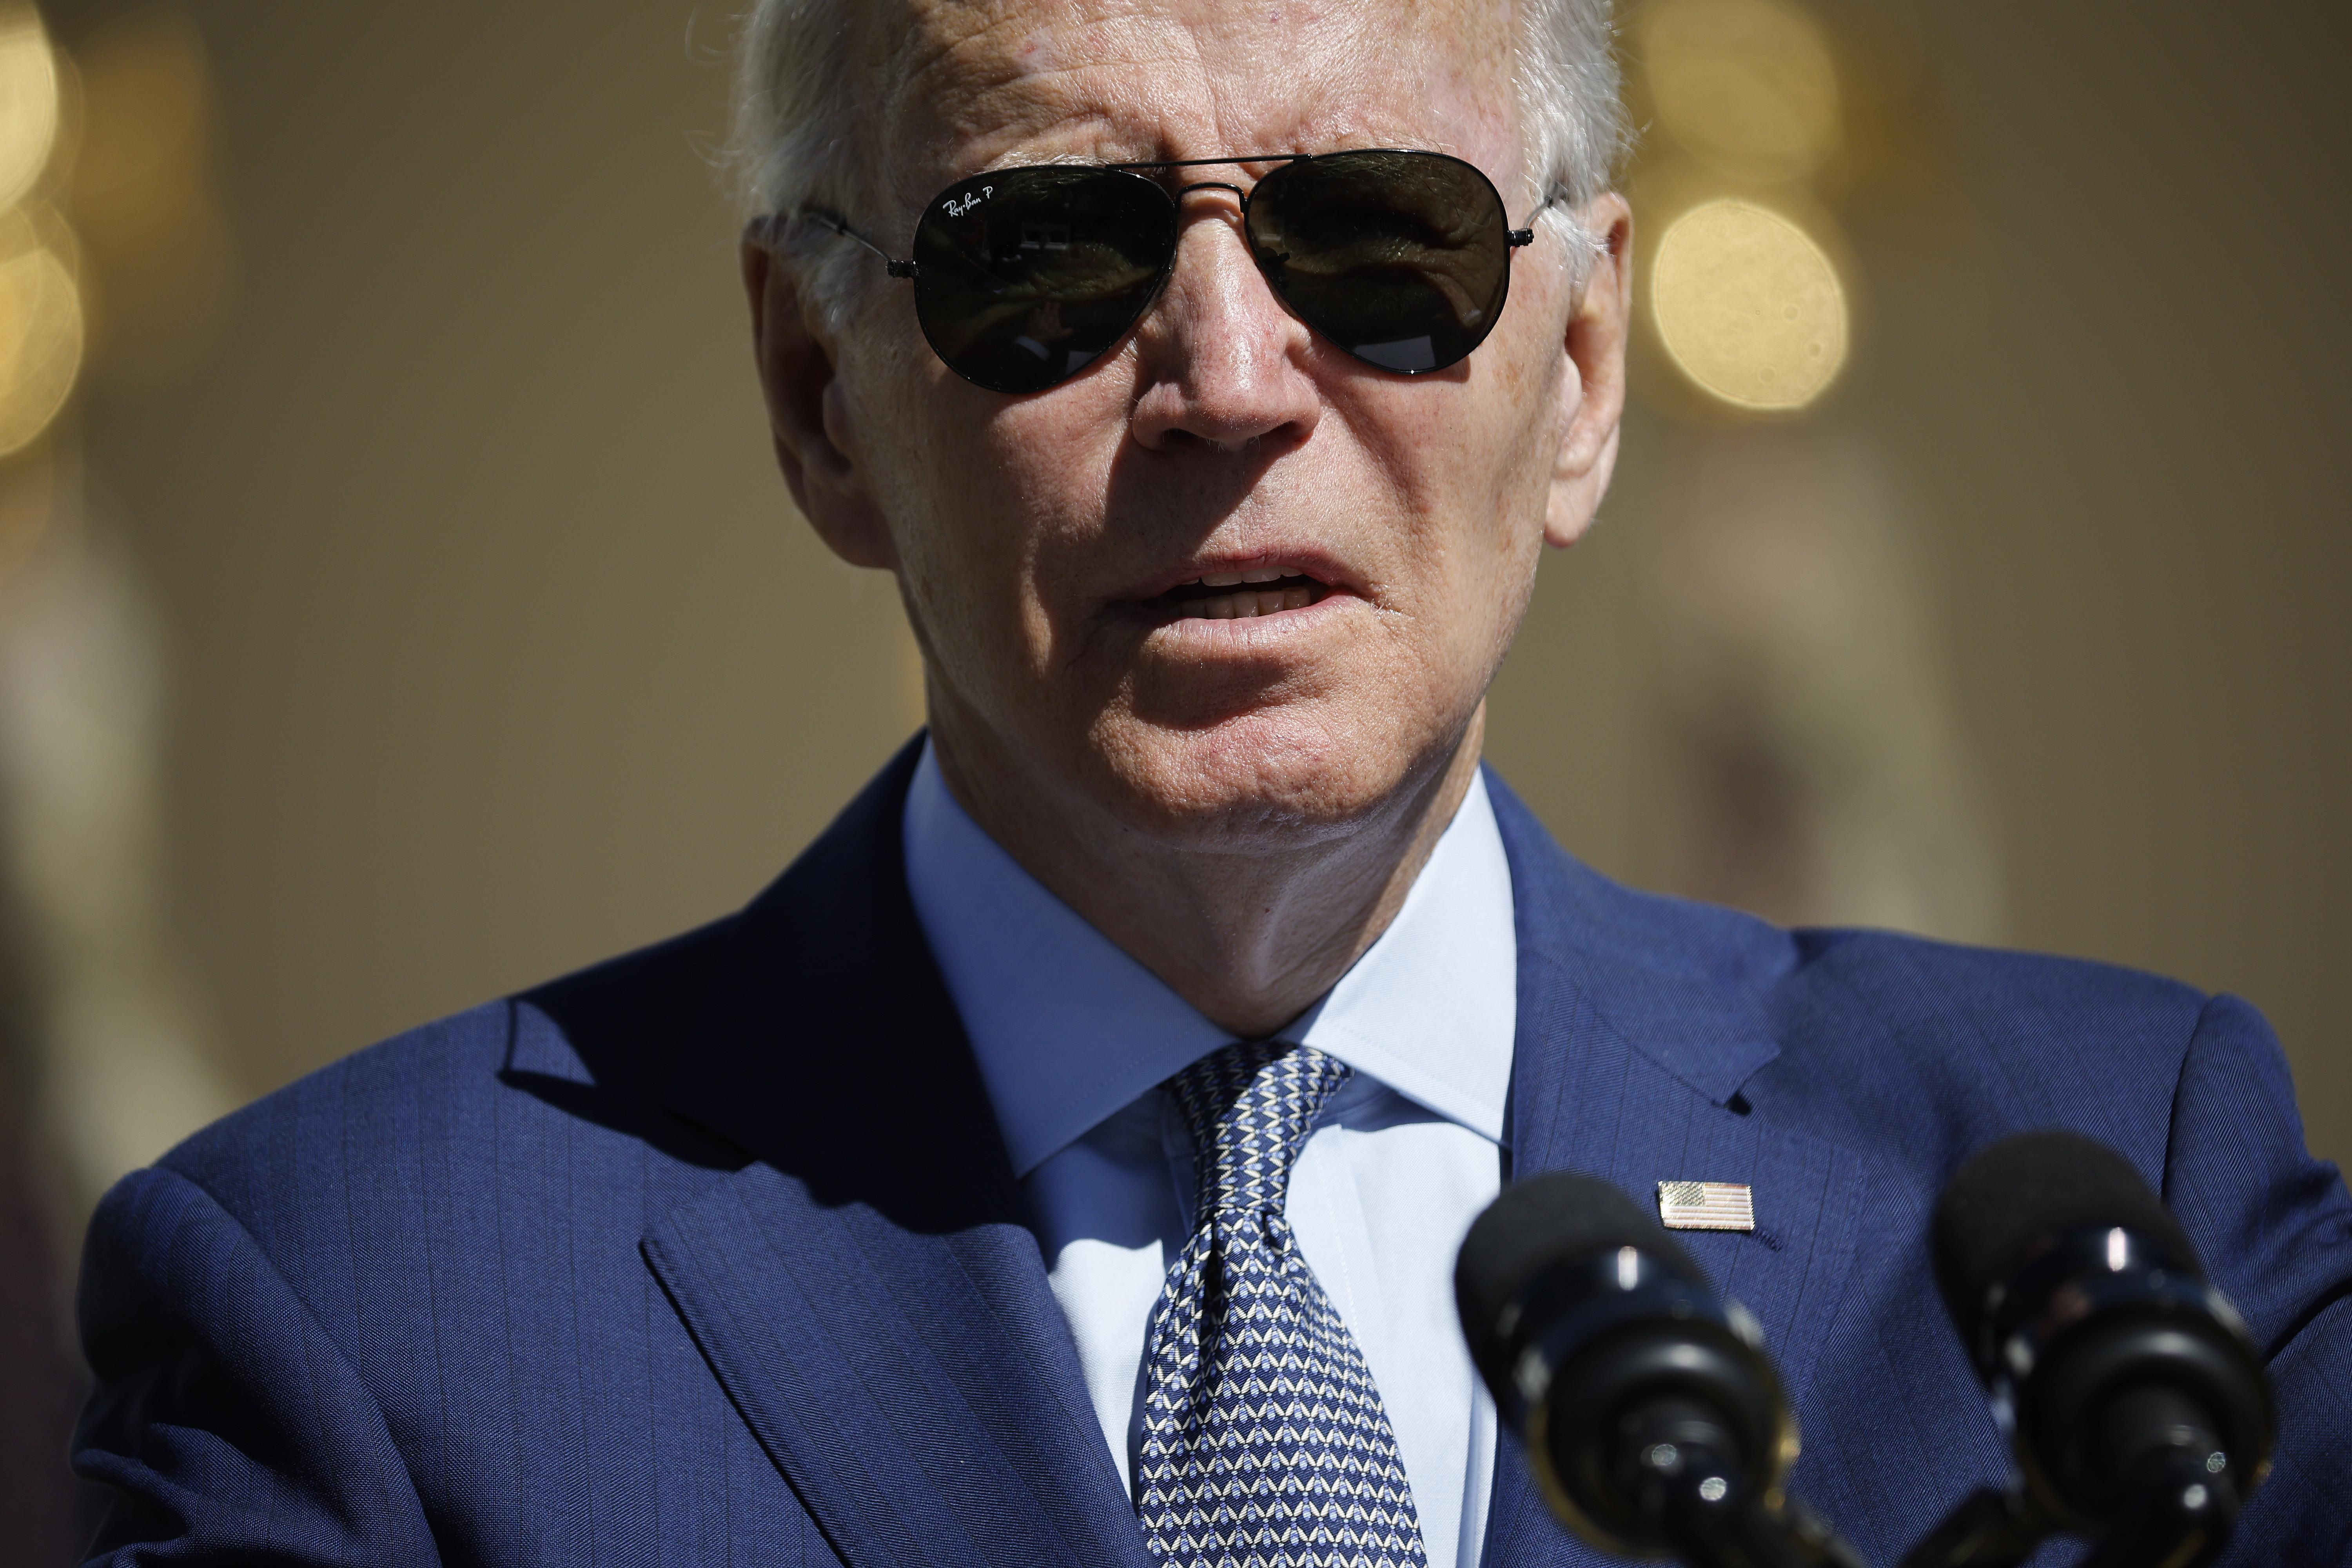 Biden wearing aviator sunglasses and a suit.